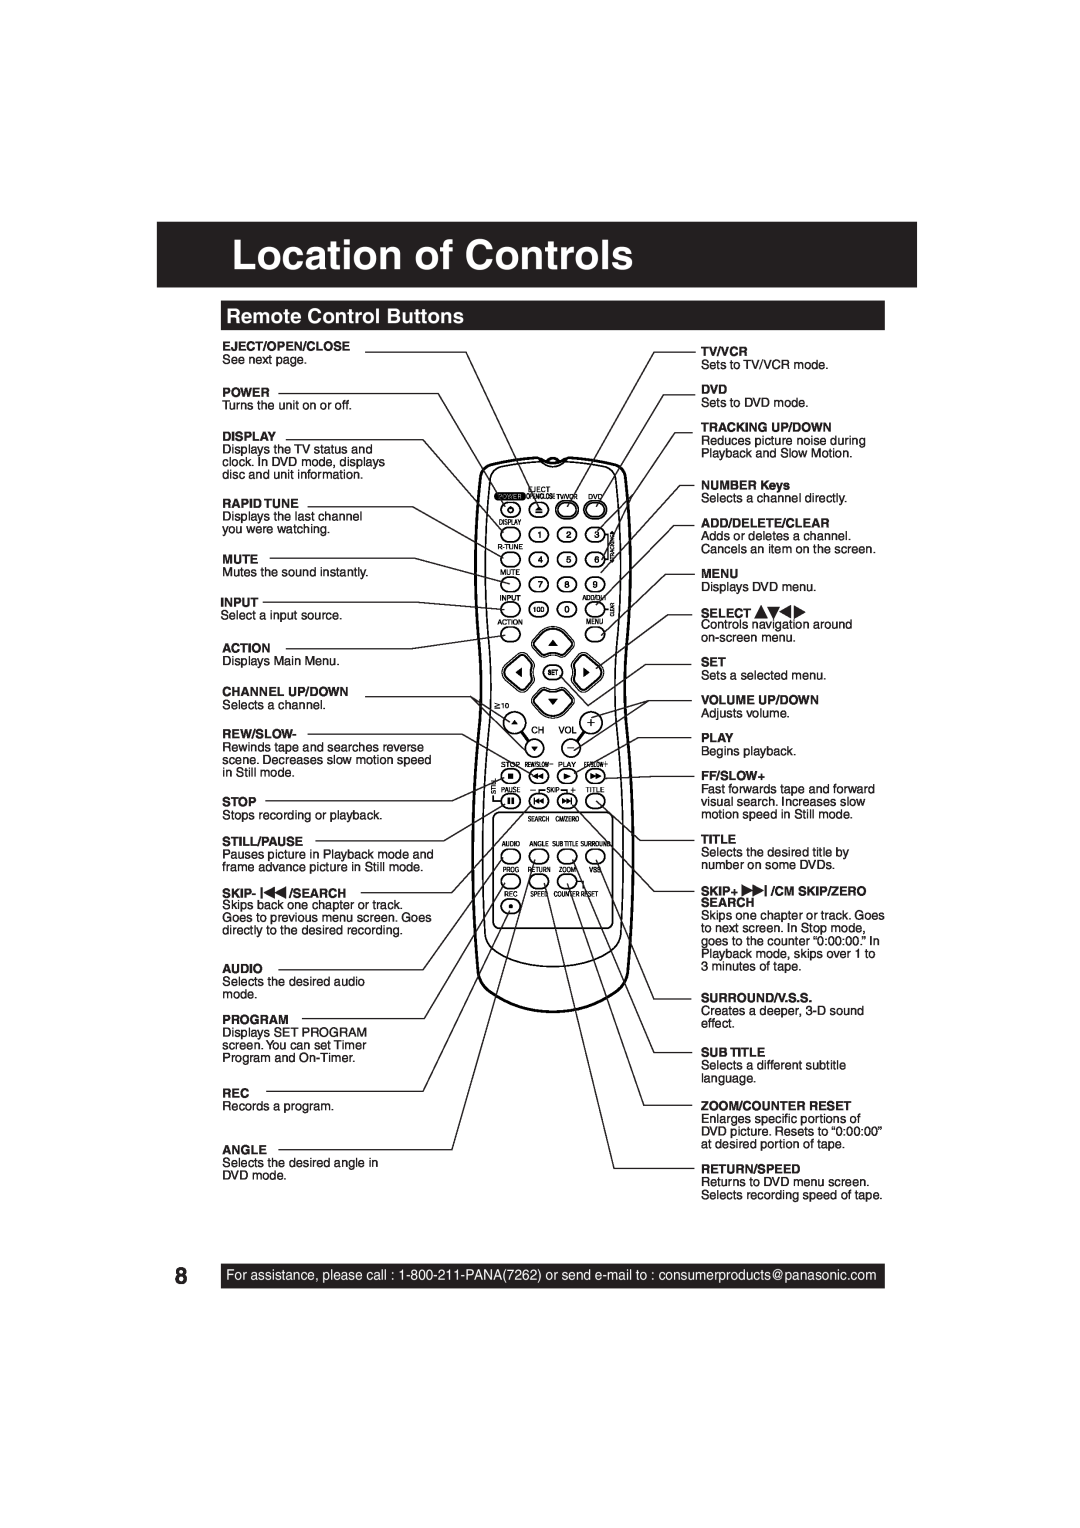 Panasonic PV-DF203, PV-DF273 manual Location of Controls, Remote Control Buttons 